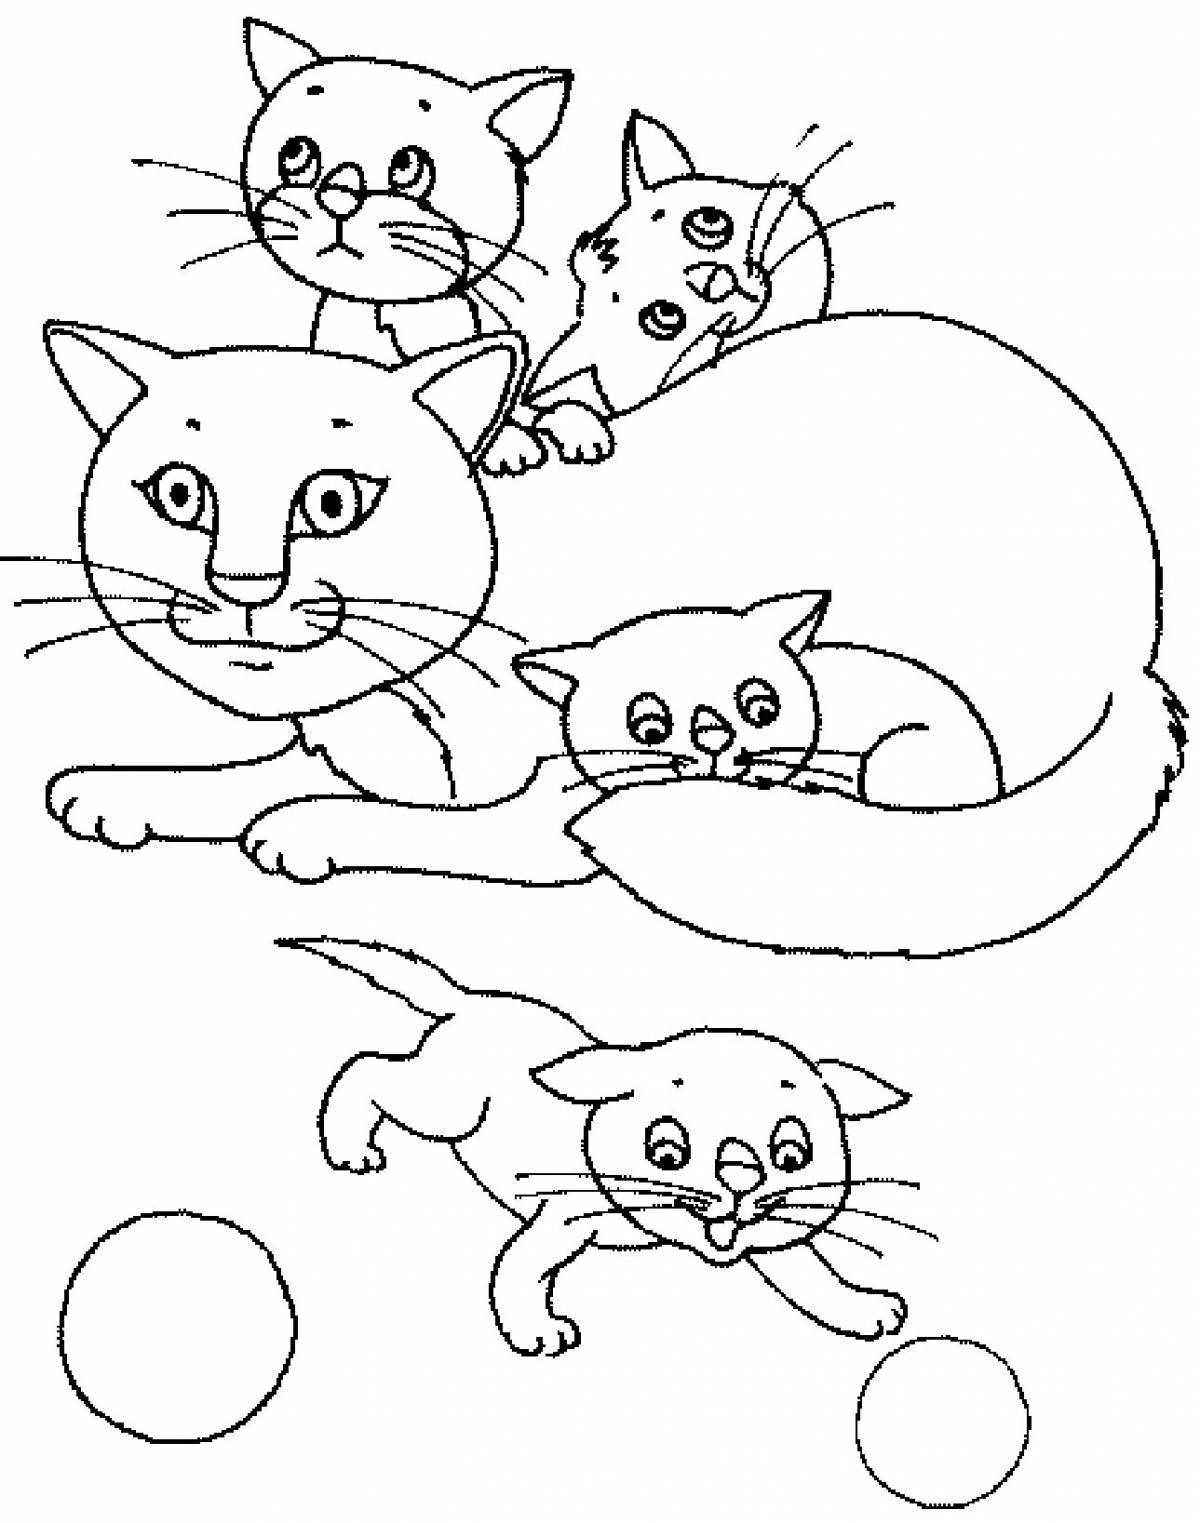 Three kittens playful coloring pages